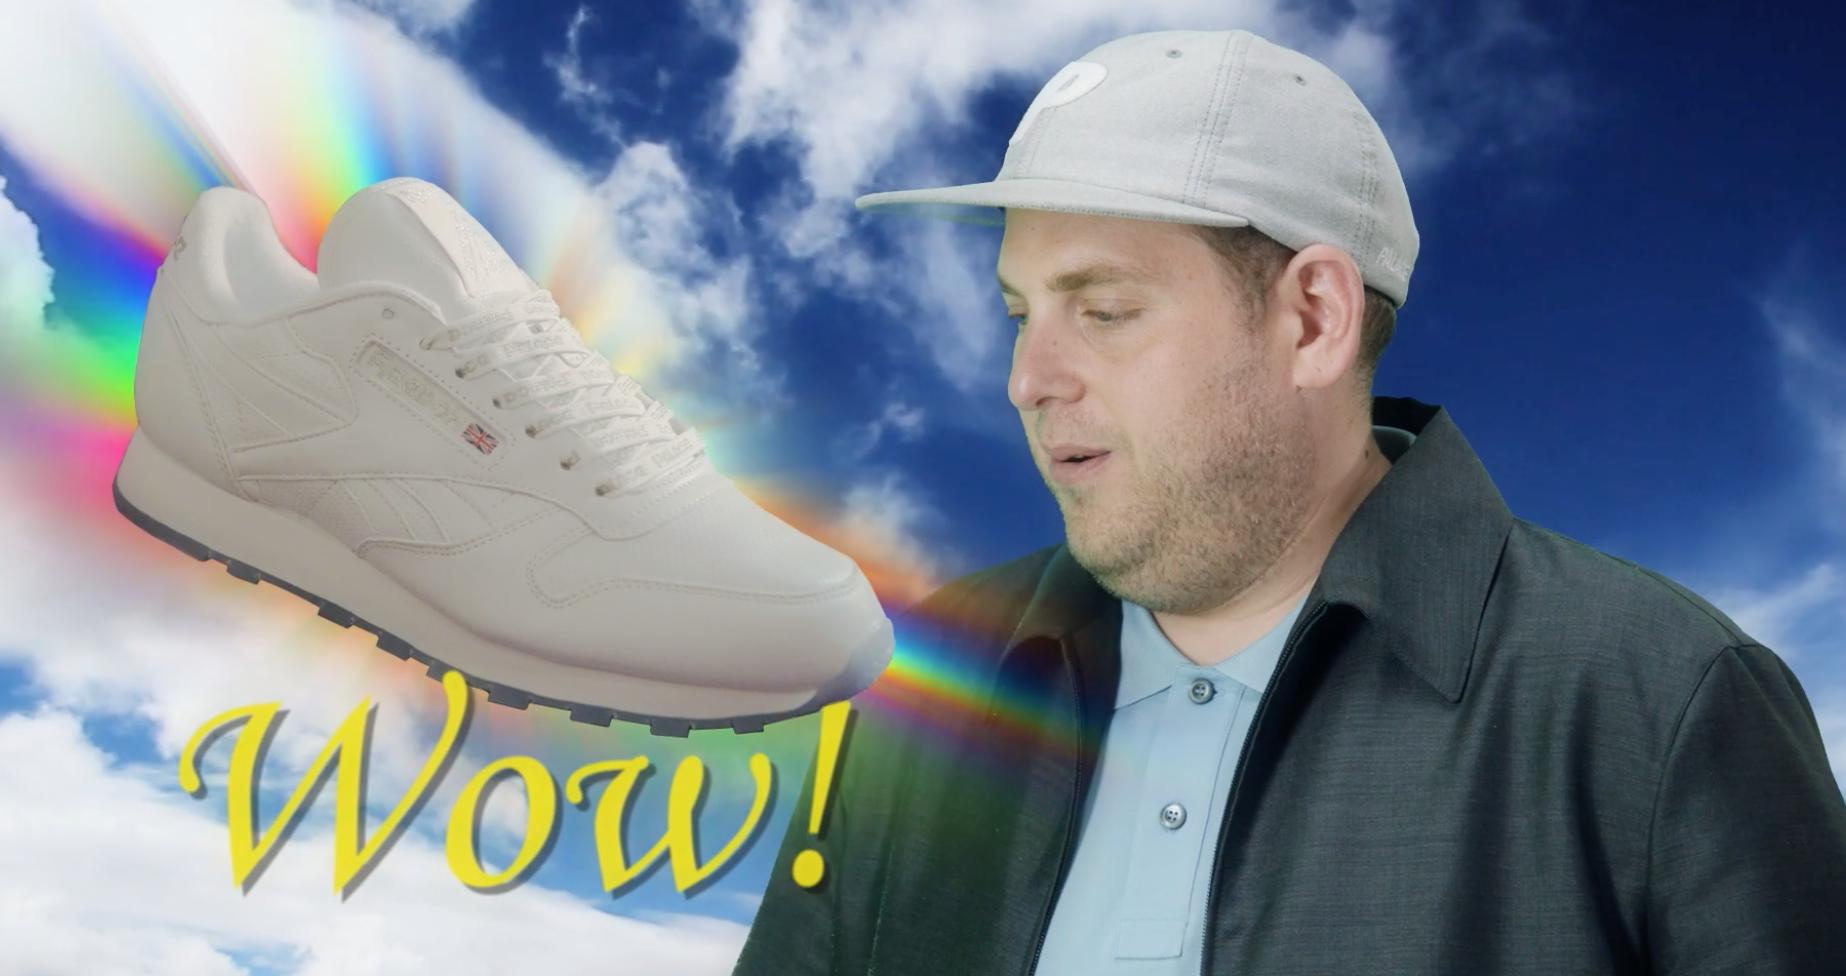 Jonah Hill Has a Perfect Approach to Street Style